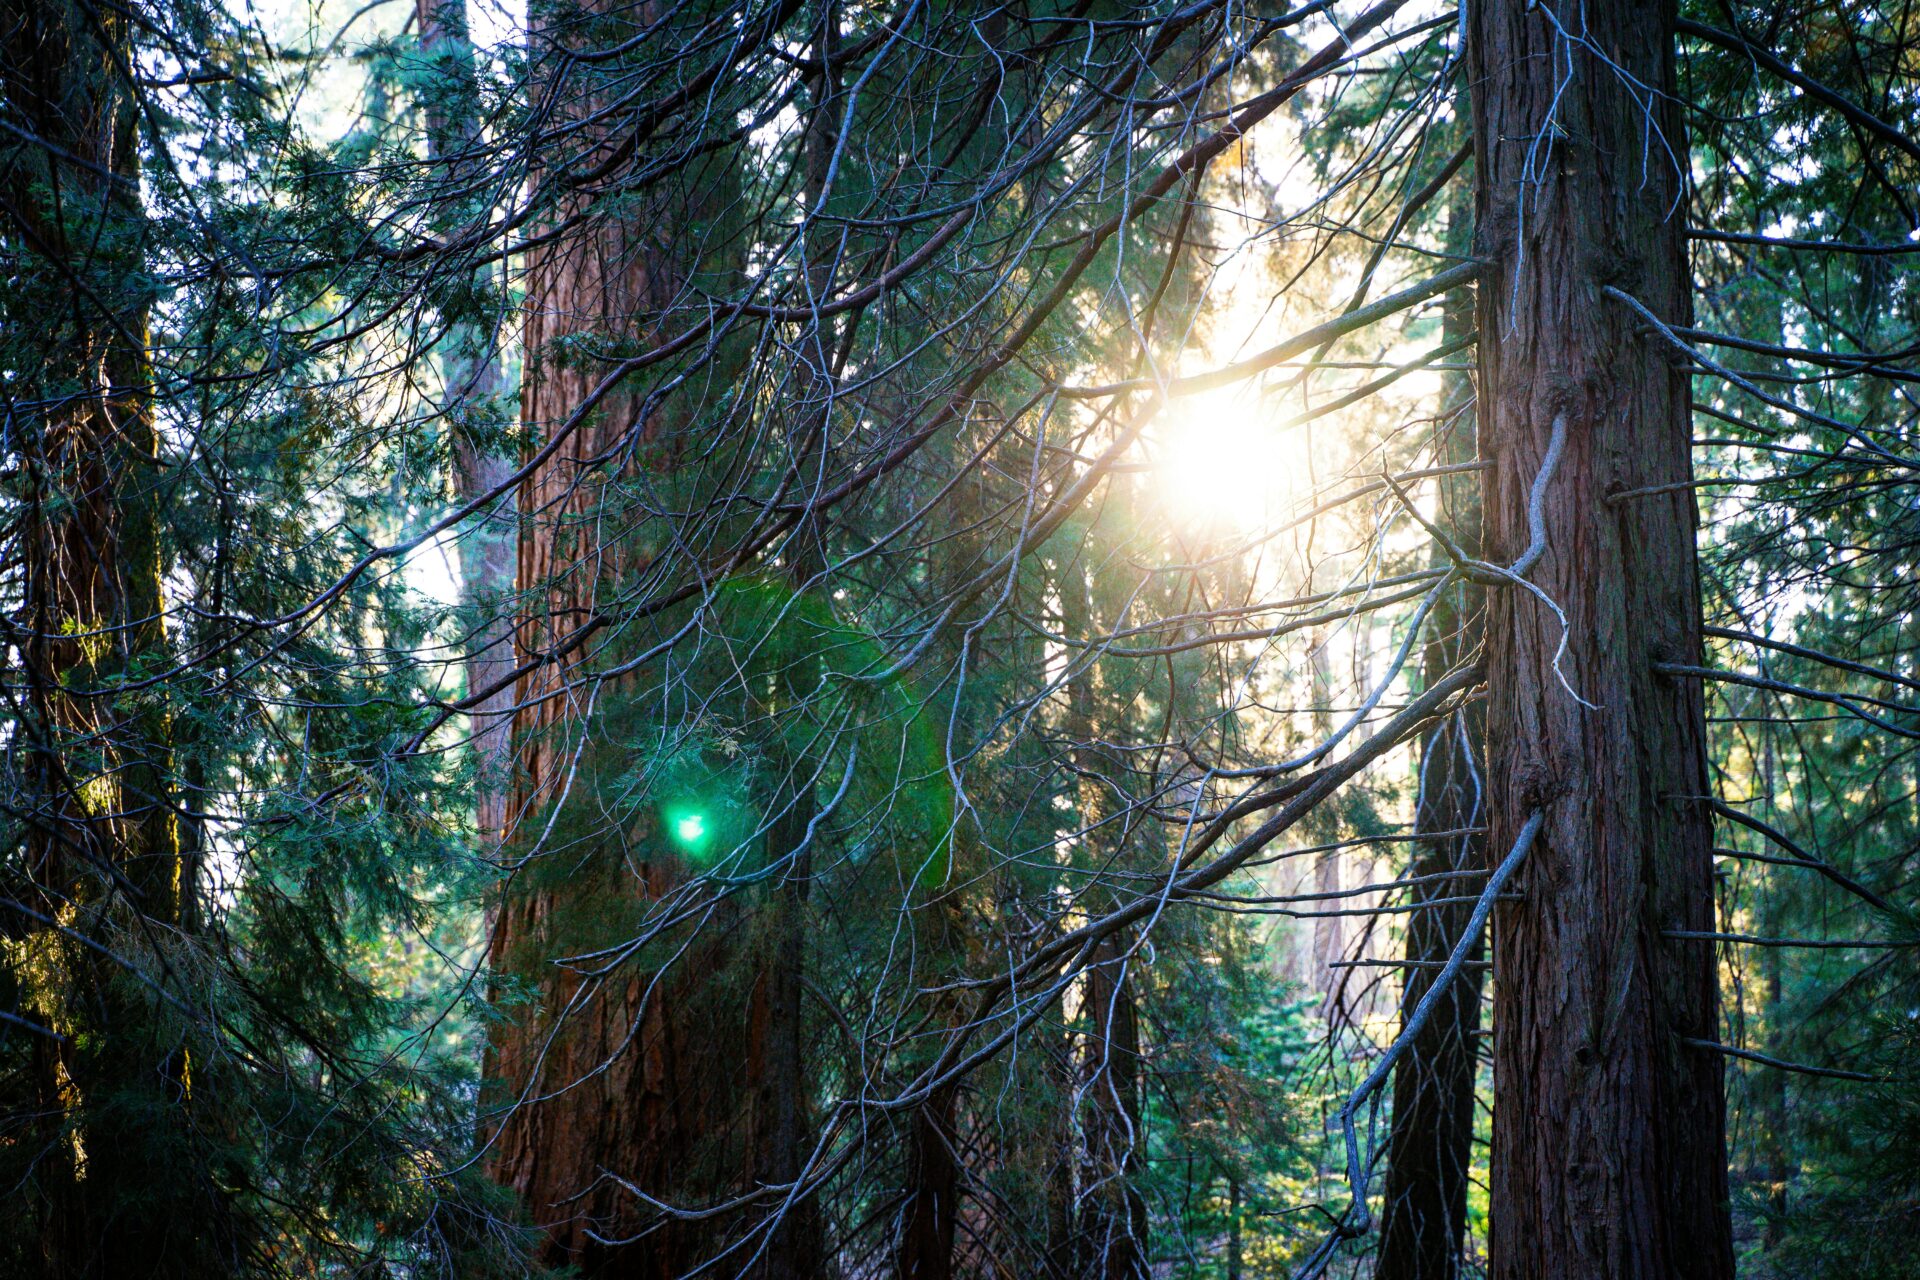 Giant sequoia trees with the sun and many sun beams peeking through two trees on the right side.